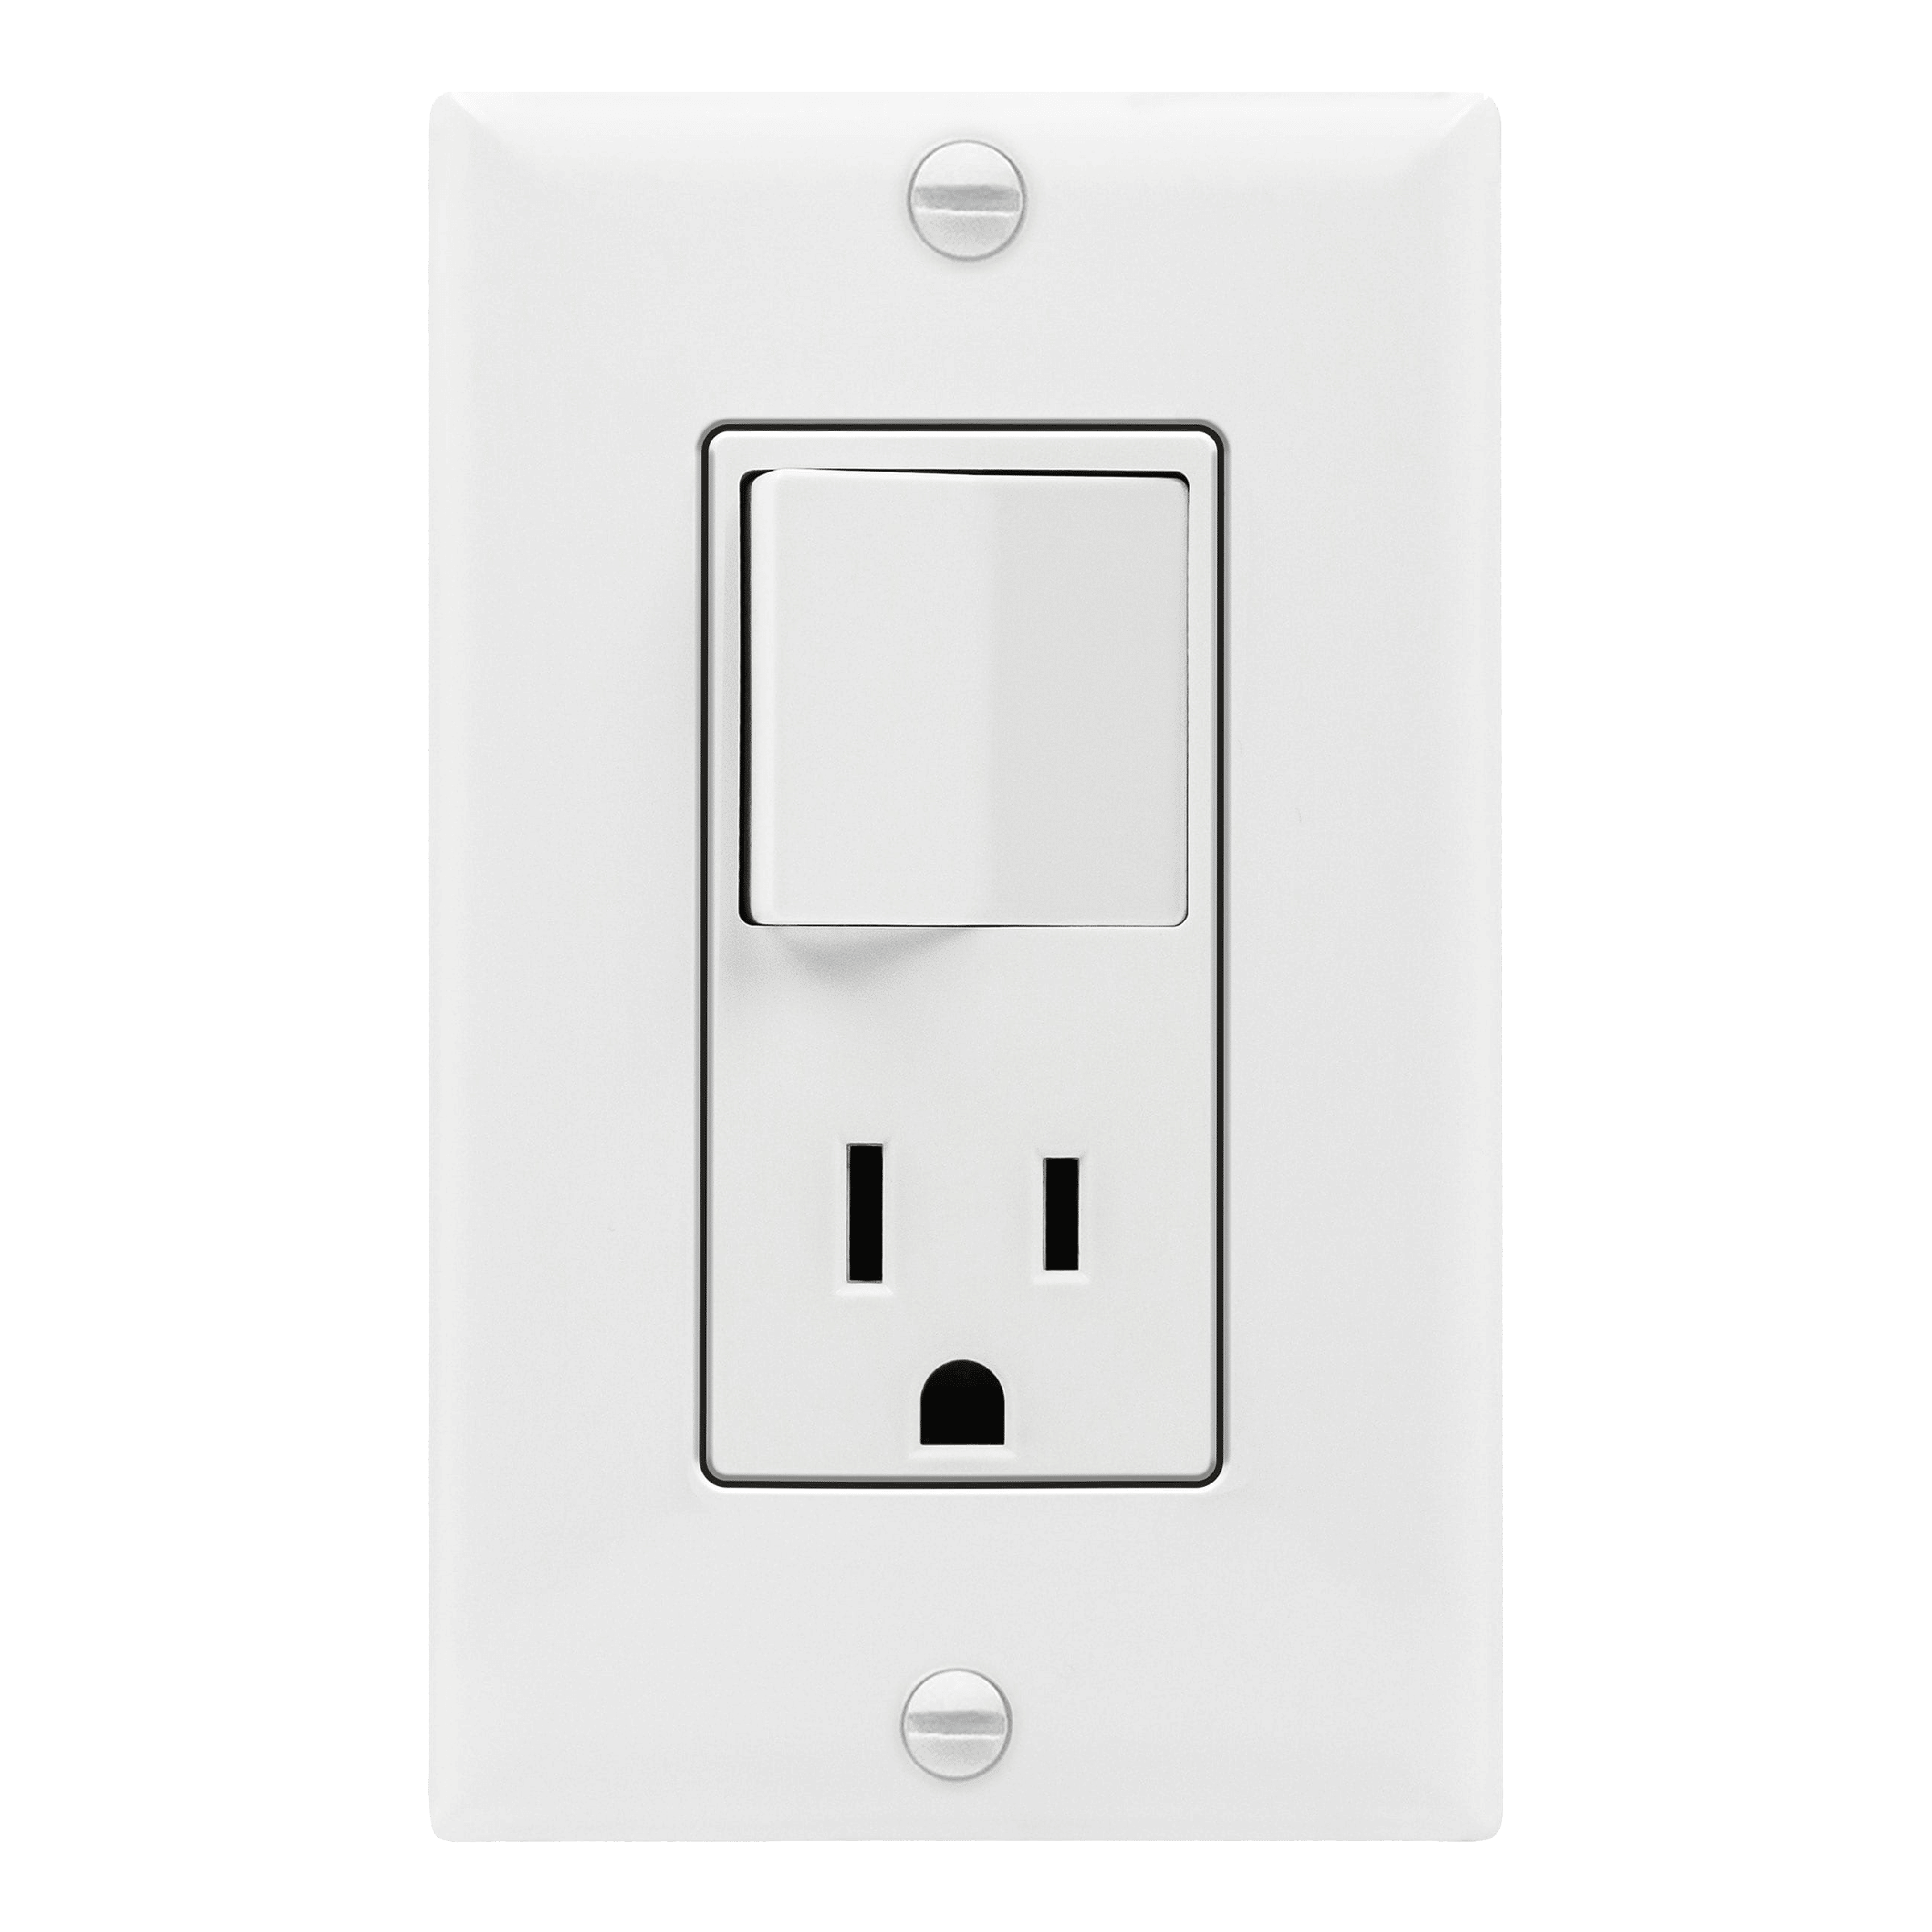 Combination Decorator Paddle Switch/Outlet